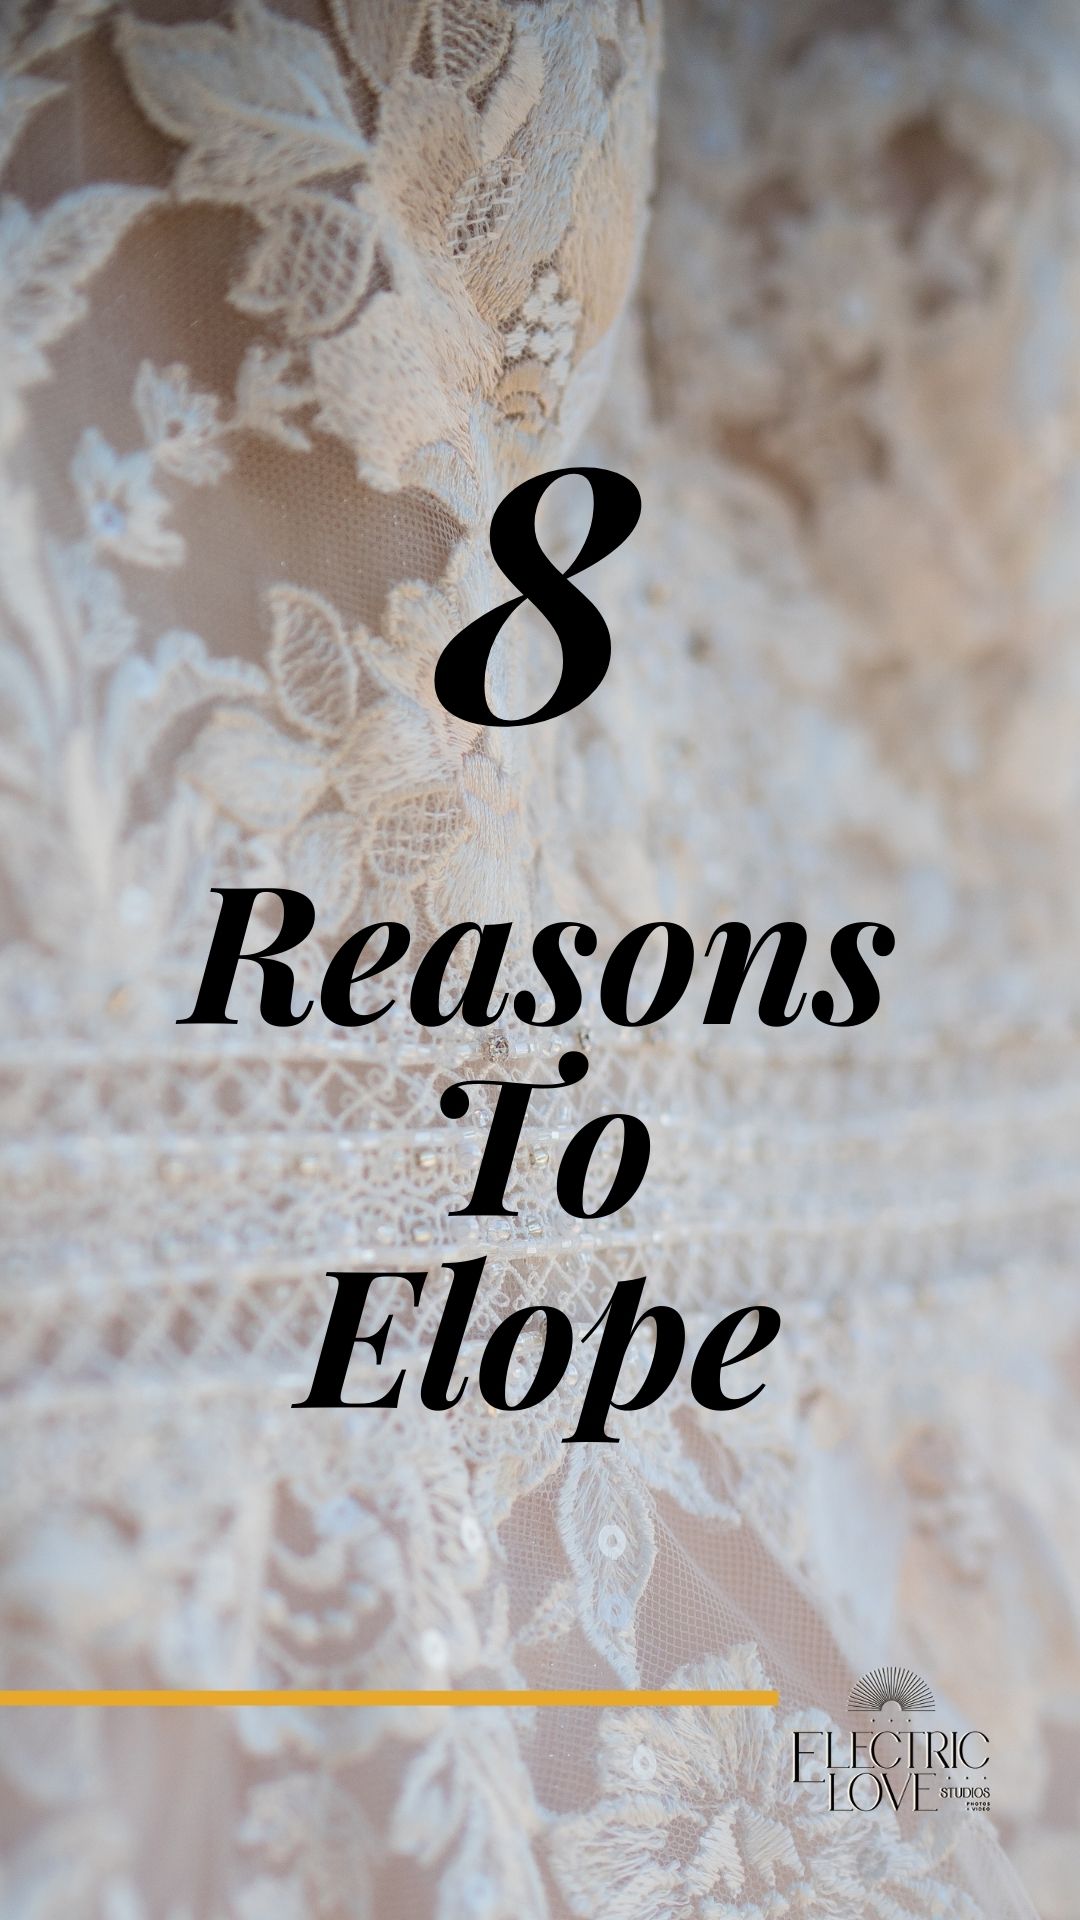 8-reasons-to-elope